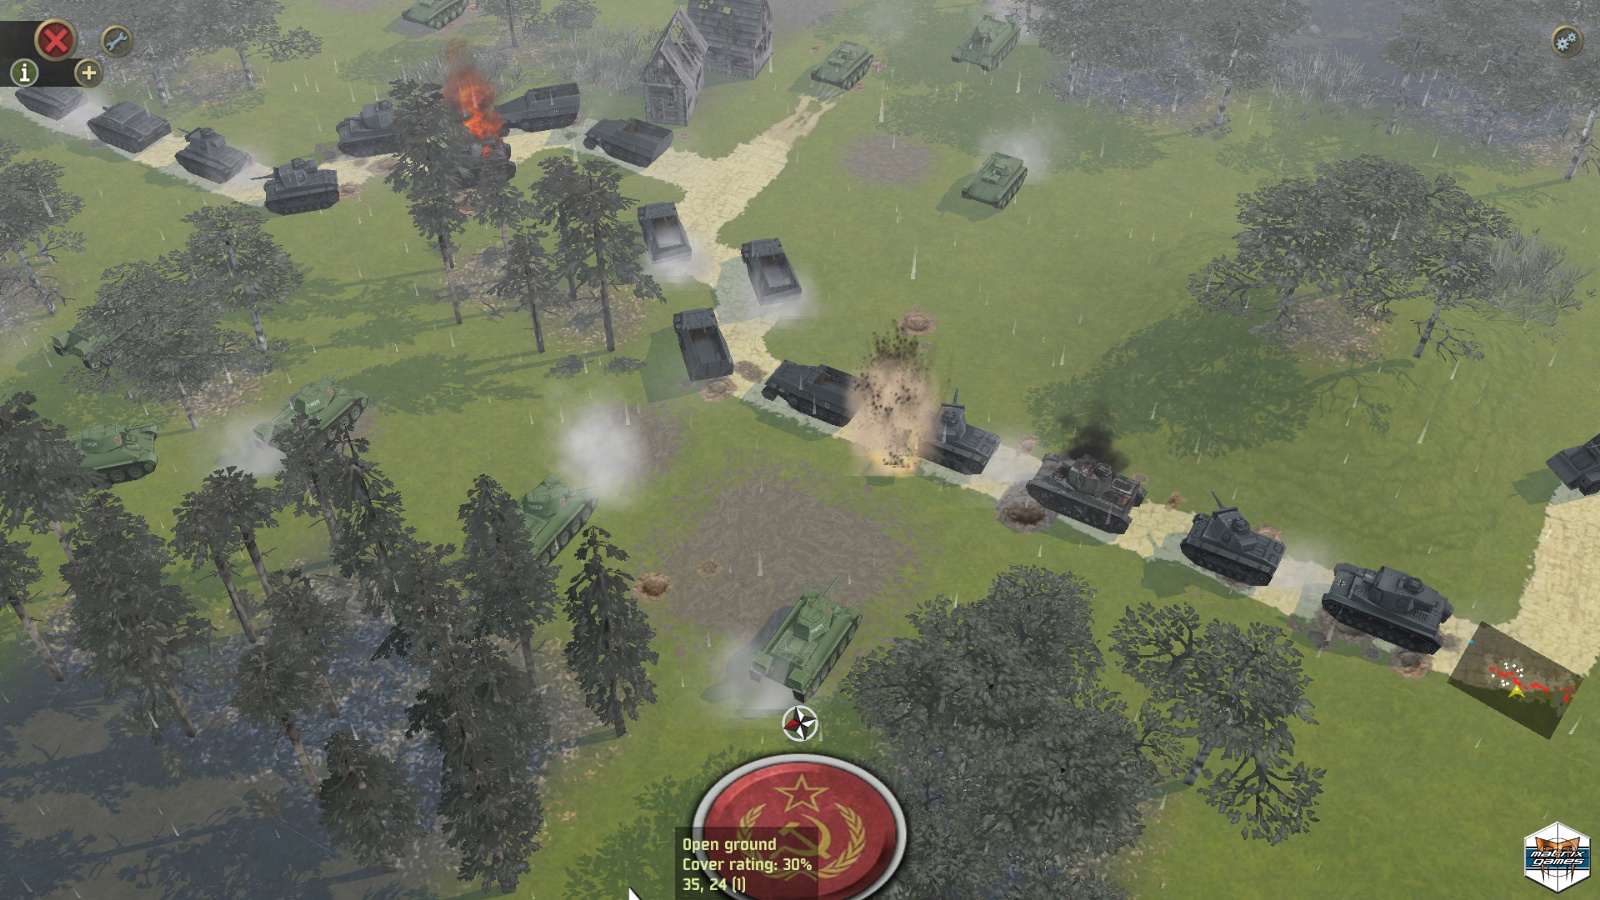 Battle Academy 2: Eastern Front Pics, Video Game Collection